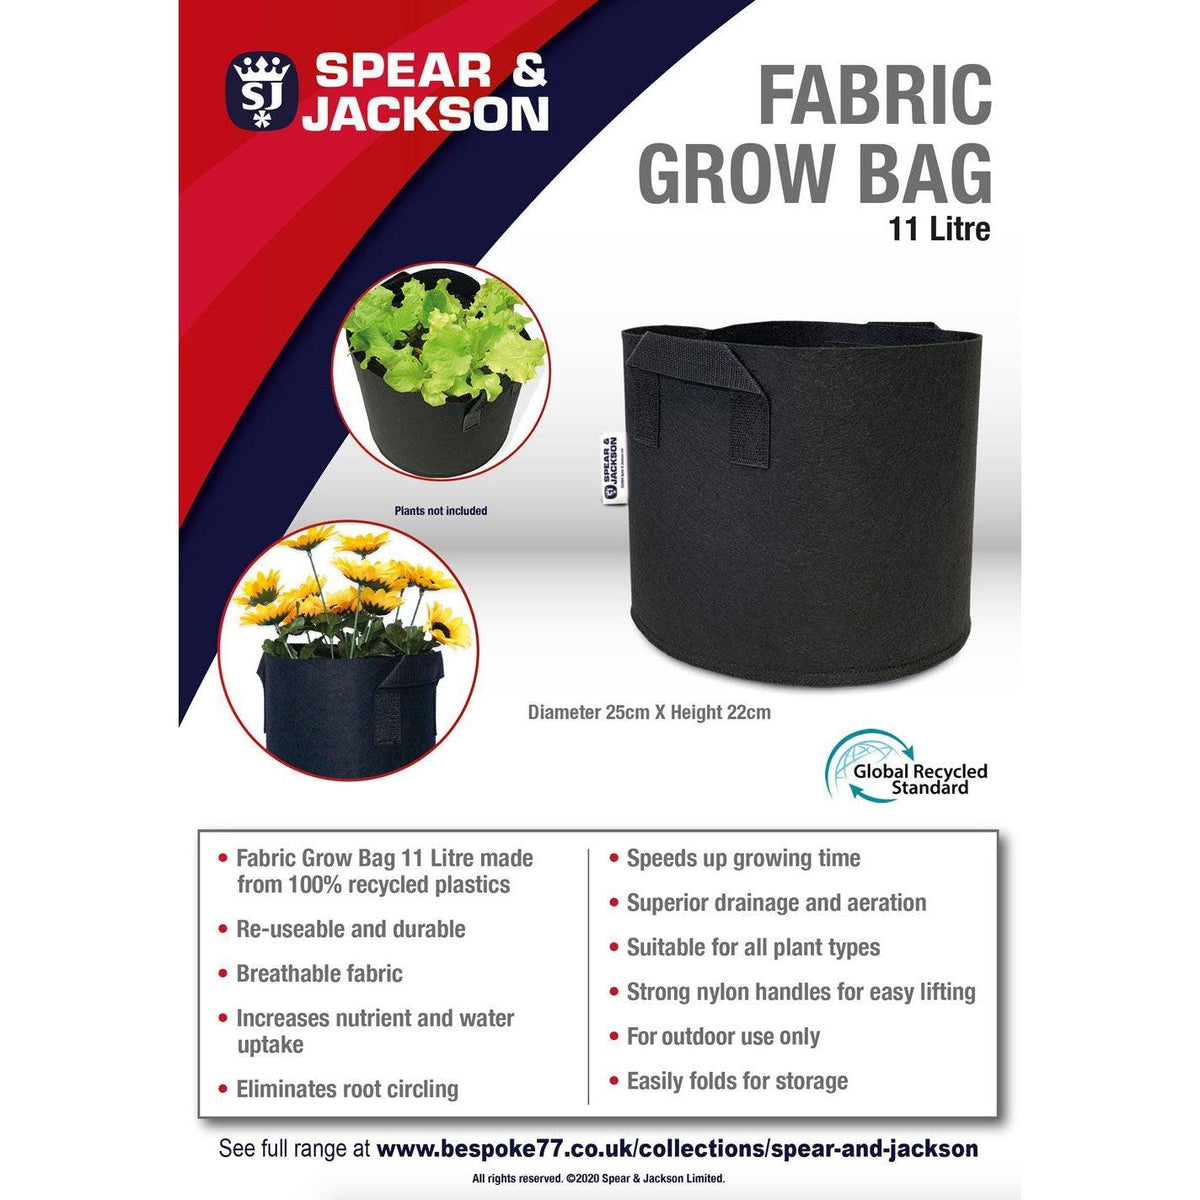 Spear and Jackson - 11 Litre Grow Bag, Re-useable, Breathable fabric, speeds up growing time